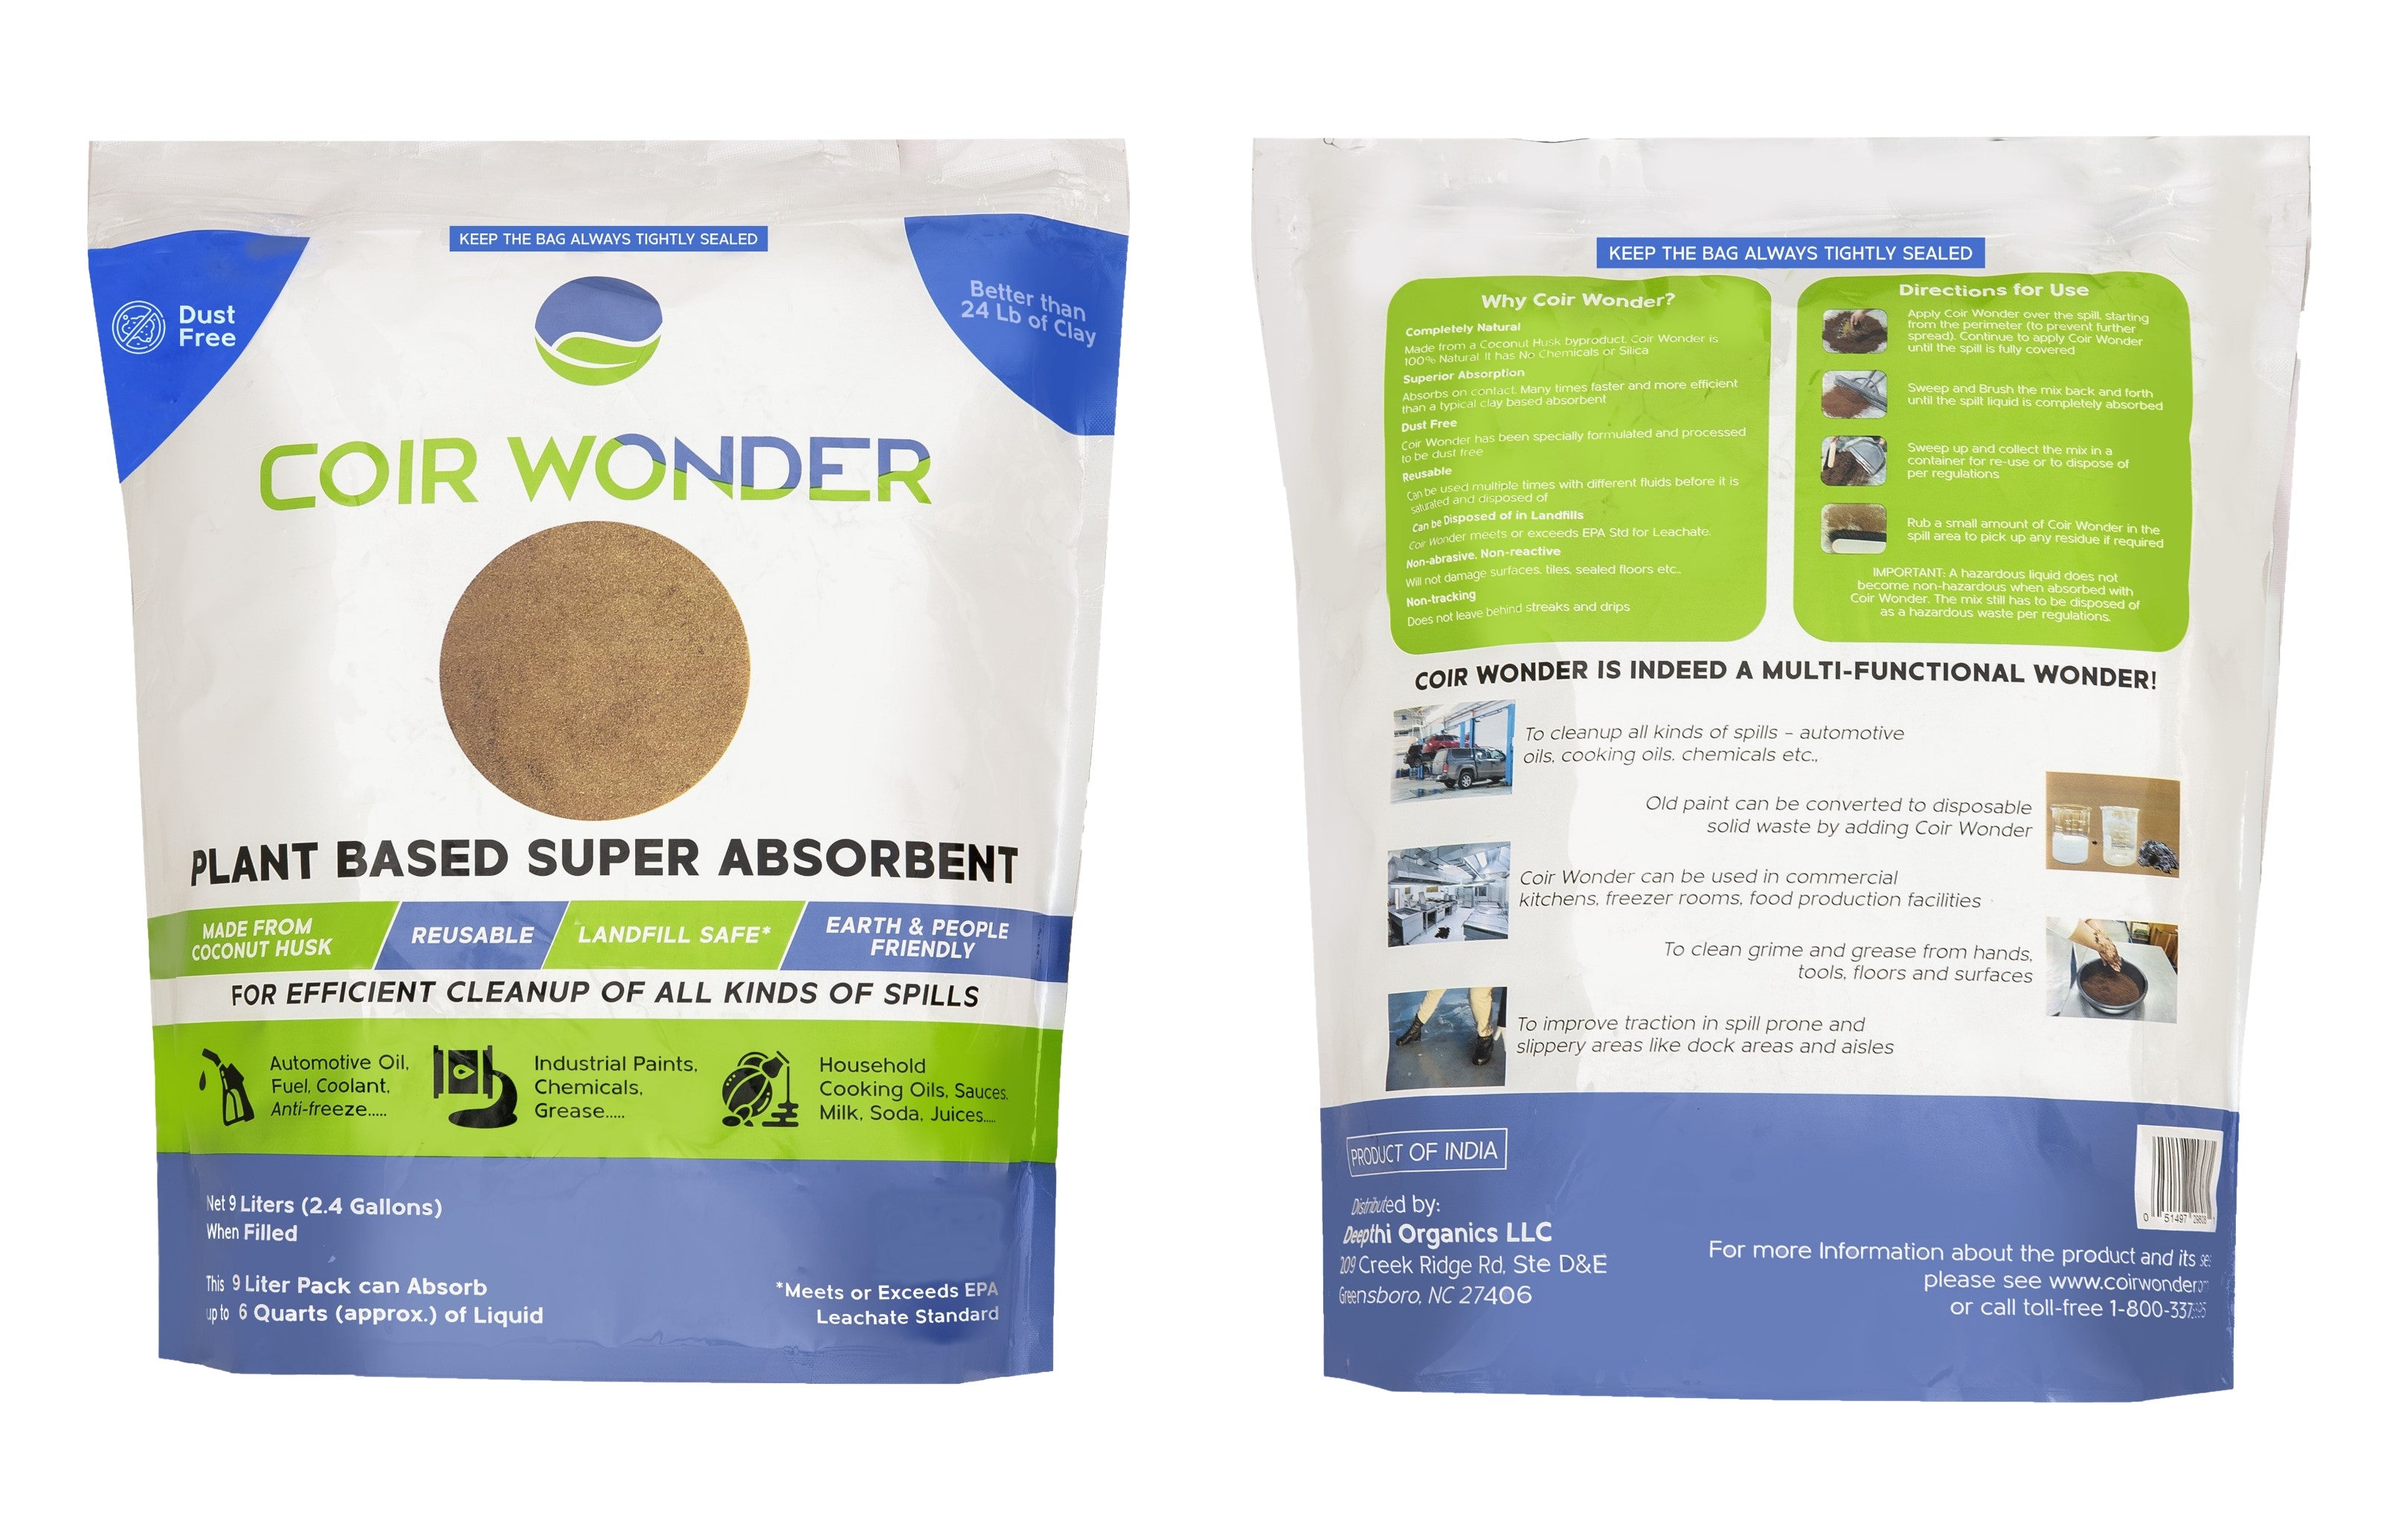 Coir Wonder 3-in-1 Oil Absorbent, Paint Hardener, No Heat Cooking Oil Solidifier and Sweeping Compound